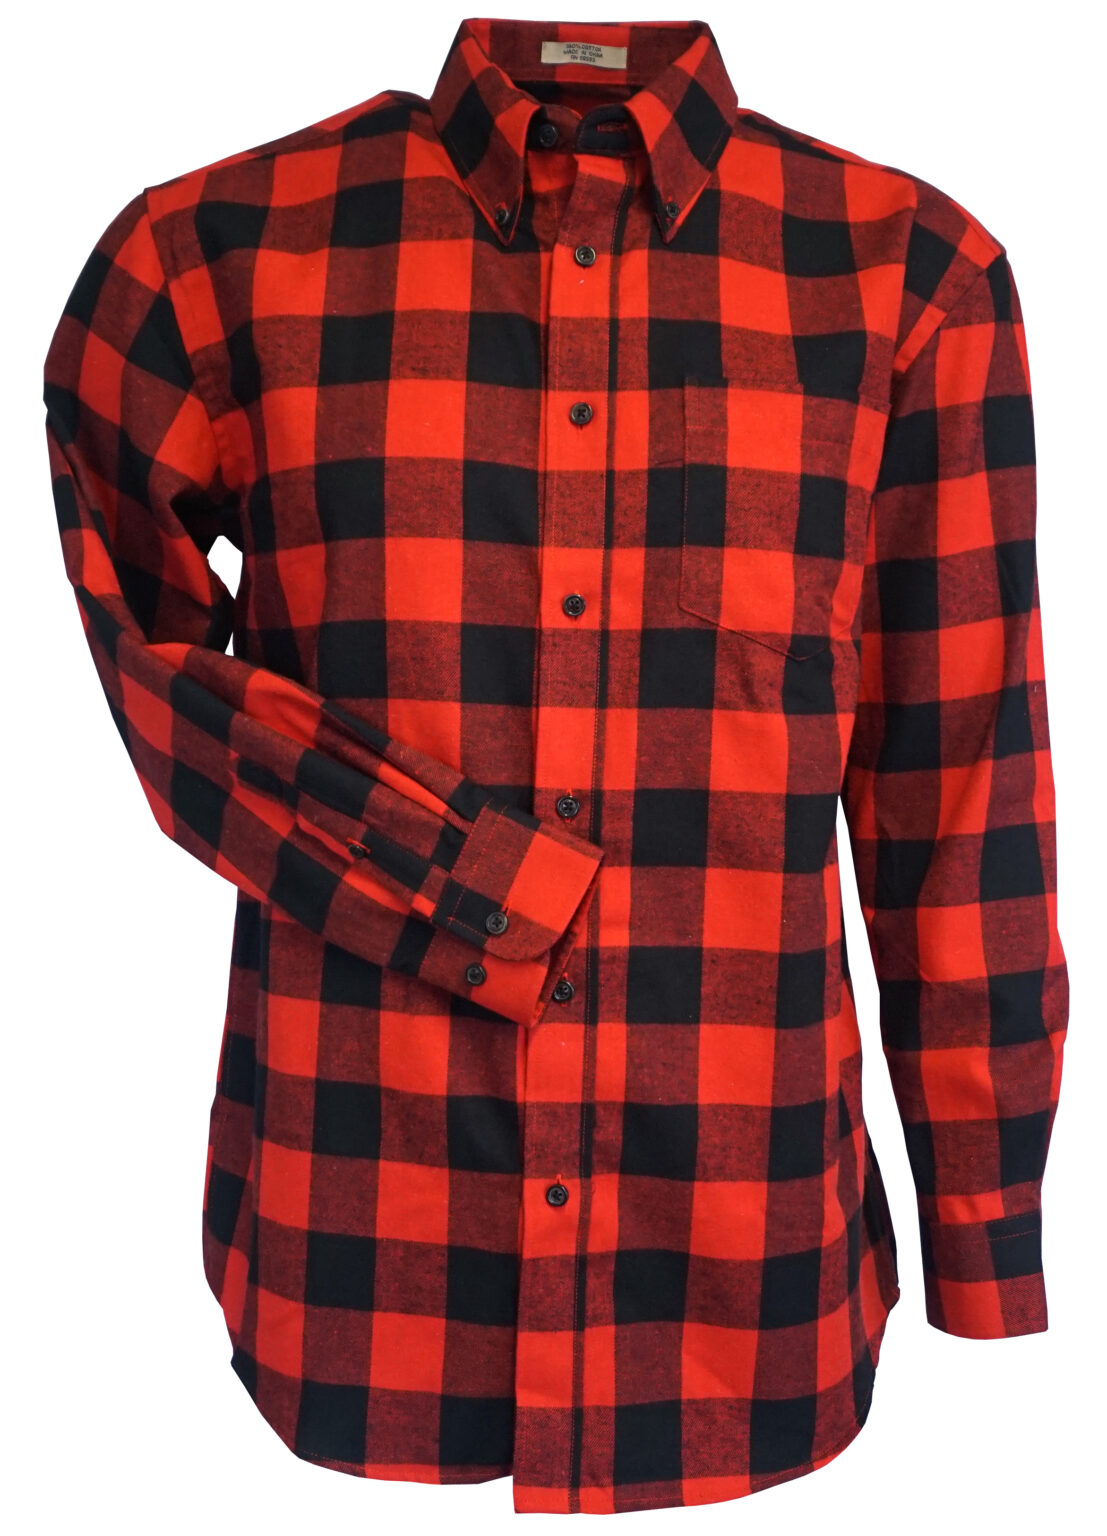 Style 1156 45 Red Long Sleeve Flannel Shirt - Foxfire, Inc.